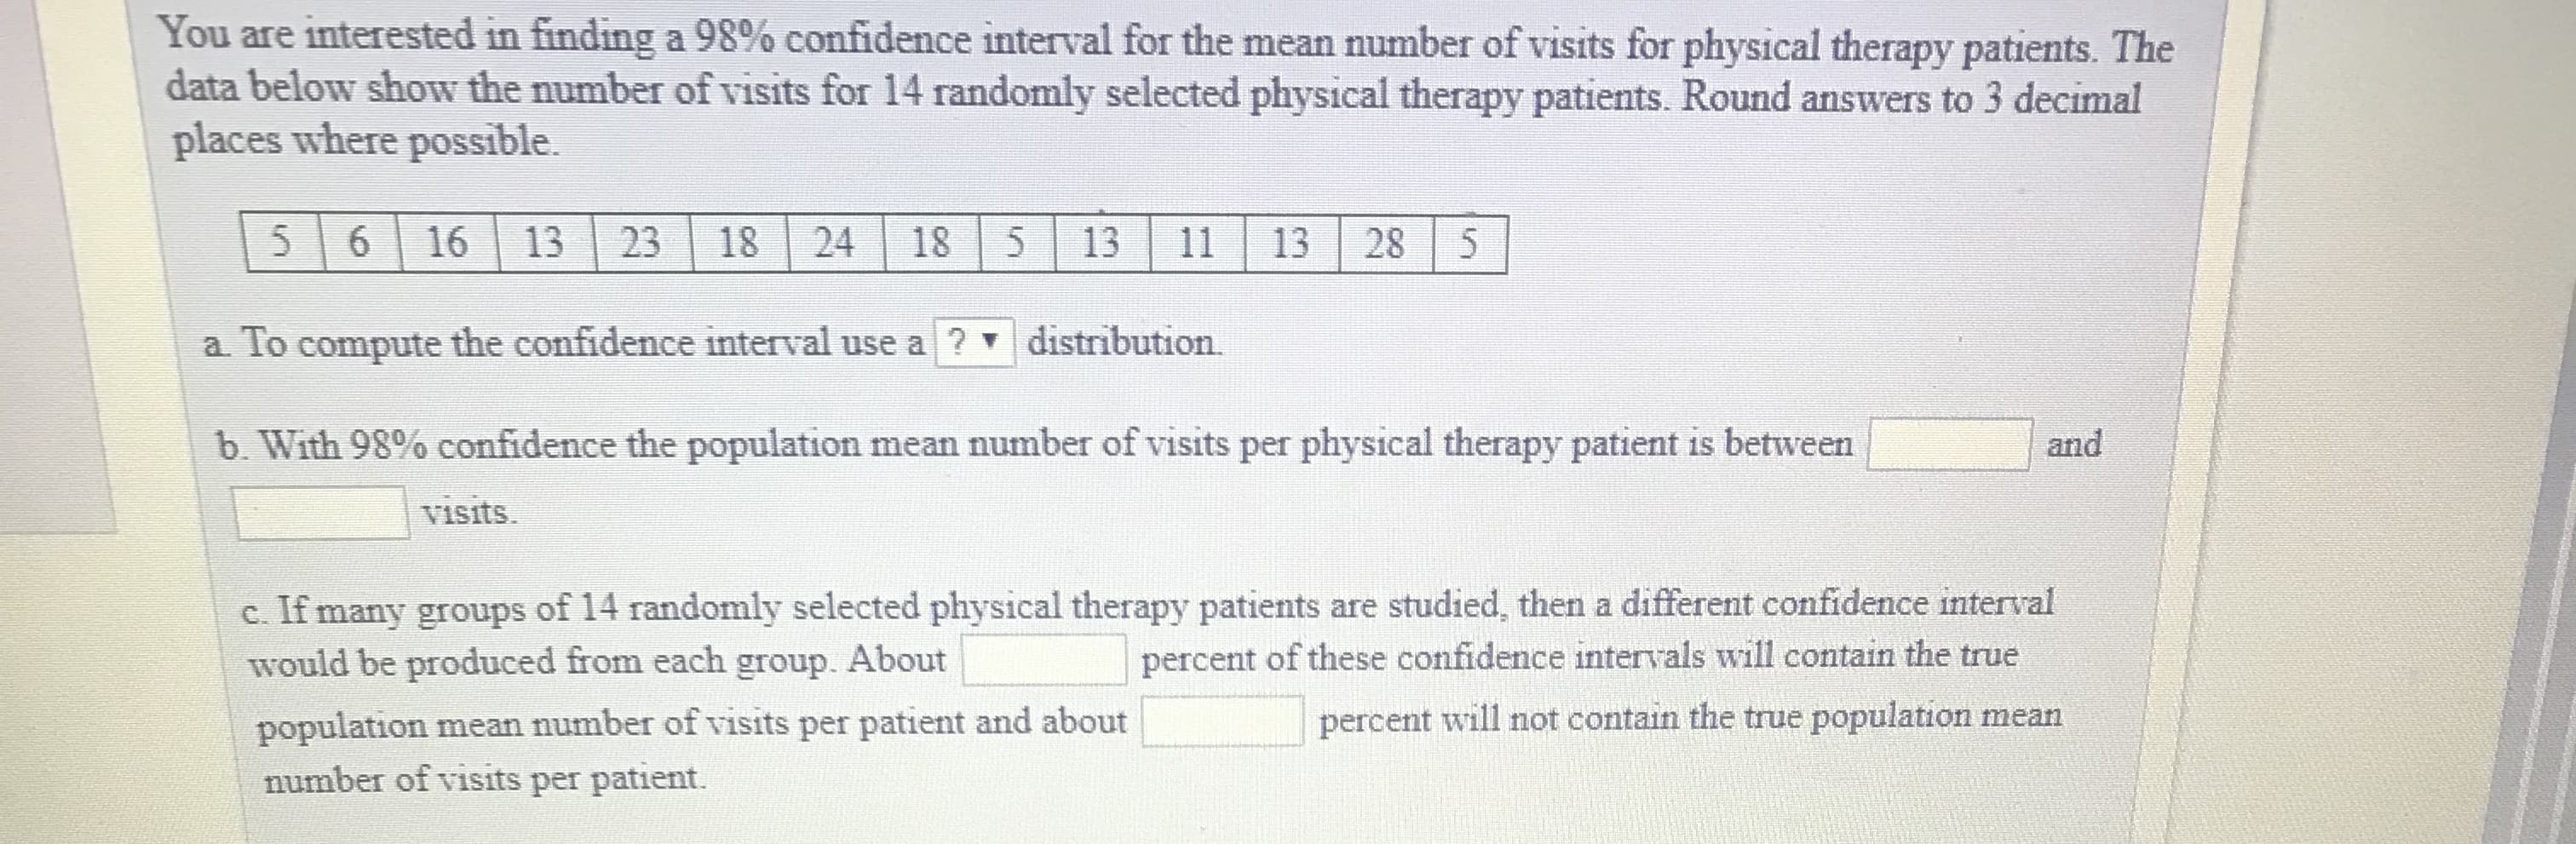 You are interested in finding a 98% confidence interval for the mean number of visits for physical therapy patients. The
data below show the number of visits for 14 randomly selected physical therapy patients. Round answers to 3 decimal
places where possible.
5 6 16 1323 18 24 18 513 11 13 28 5
a. To compute the confidence interval use a ? distribution.
b. With 98% confidence the population mean number of visits per physical therapy patient is between
and
visits
c. If many groups of 14 randomly selected physical therapy patients are studied, then a different confidence interval
would be produced from each group. About
population mean number of visits per patient and about
number of visits per patient.
percent of these confidence intervals will contain the true
percent will not contain the true population mean
